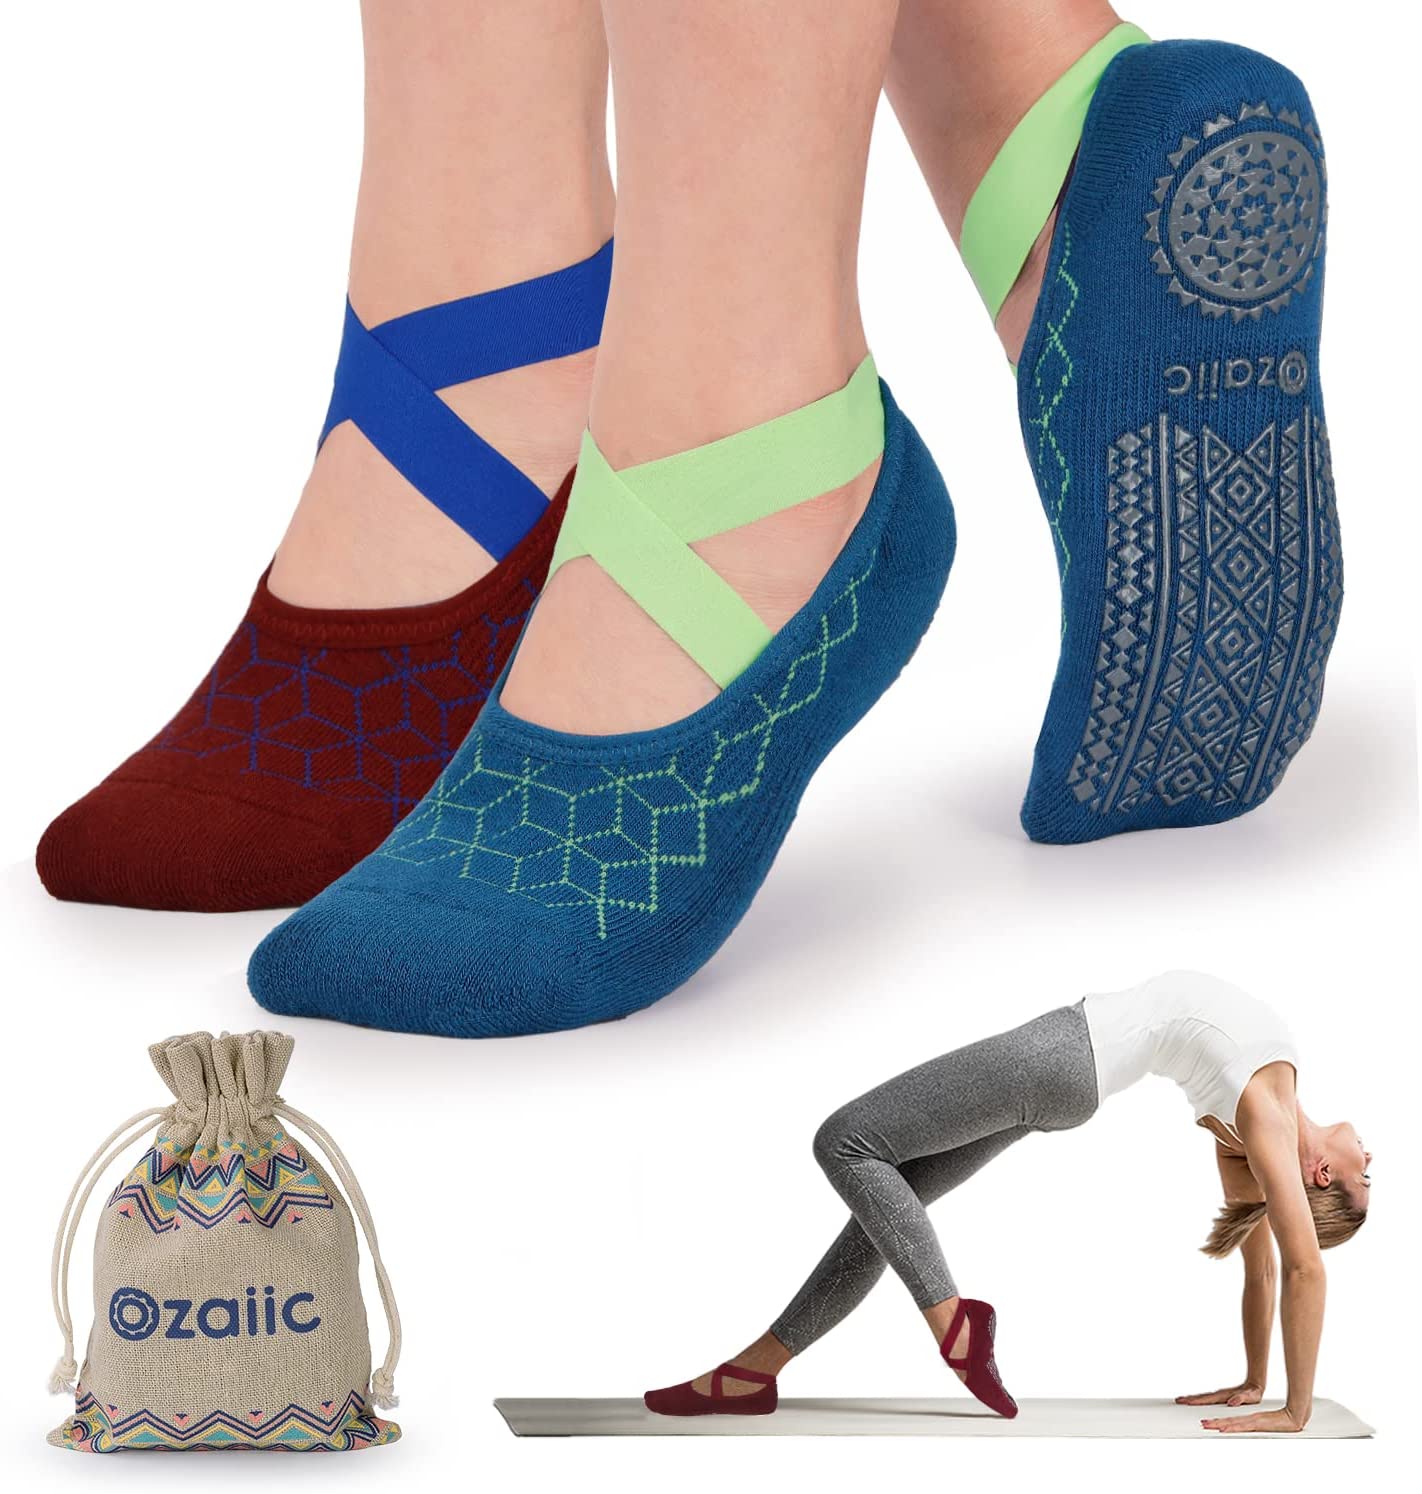 New Non-Slip Anti-friction Cotton+PVC Yoga Socks Yoga Shoes Five Toe Socks  Dance Socks – the best products in the Joom Geek online store